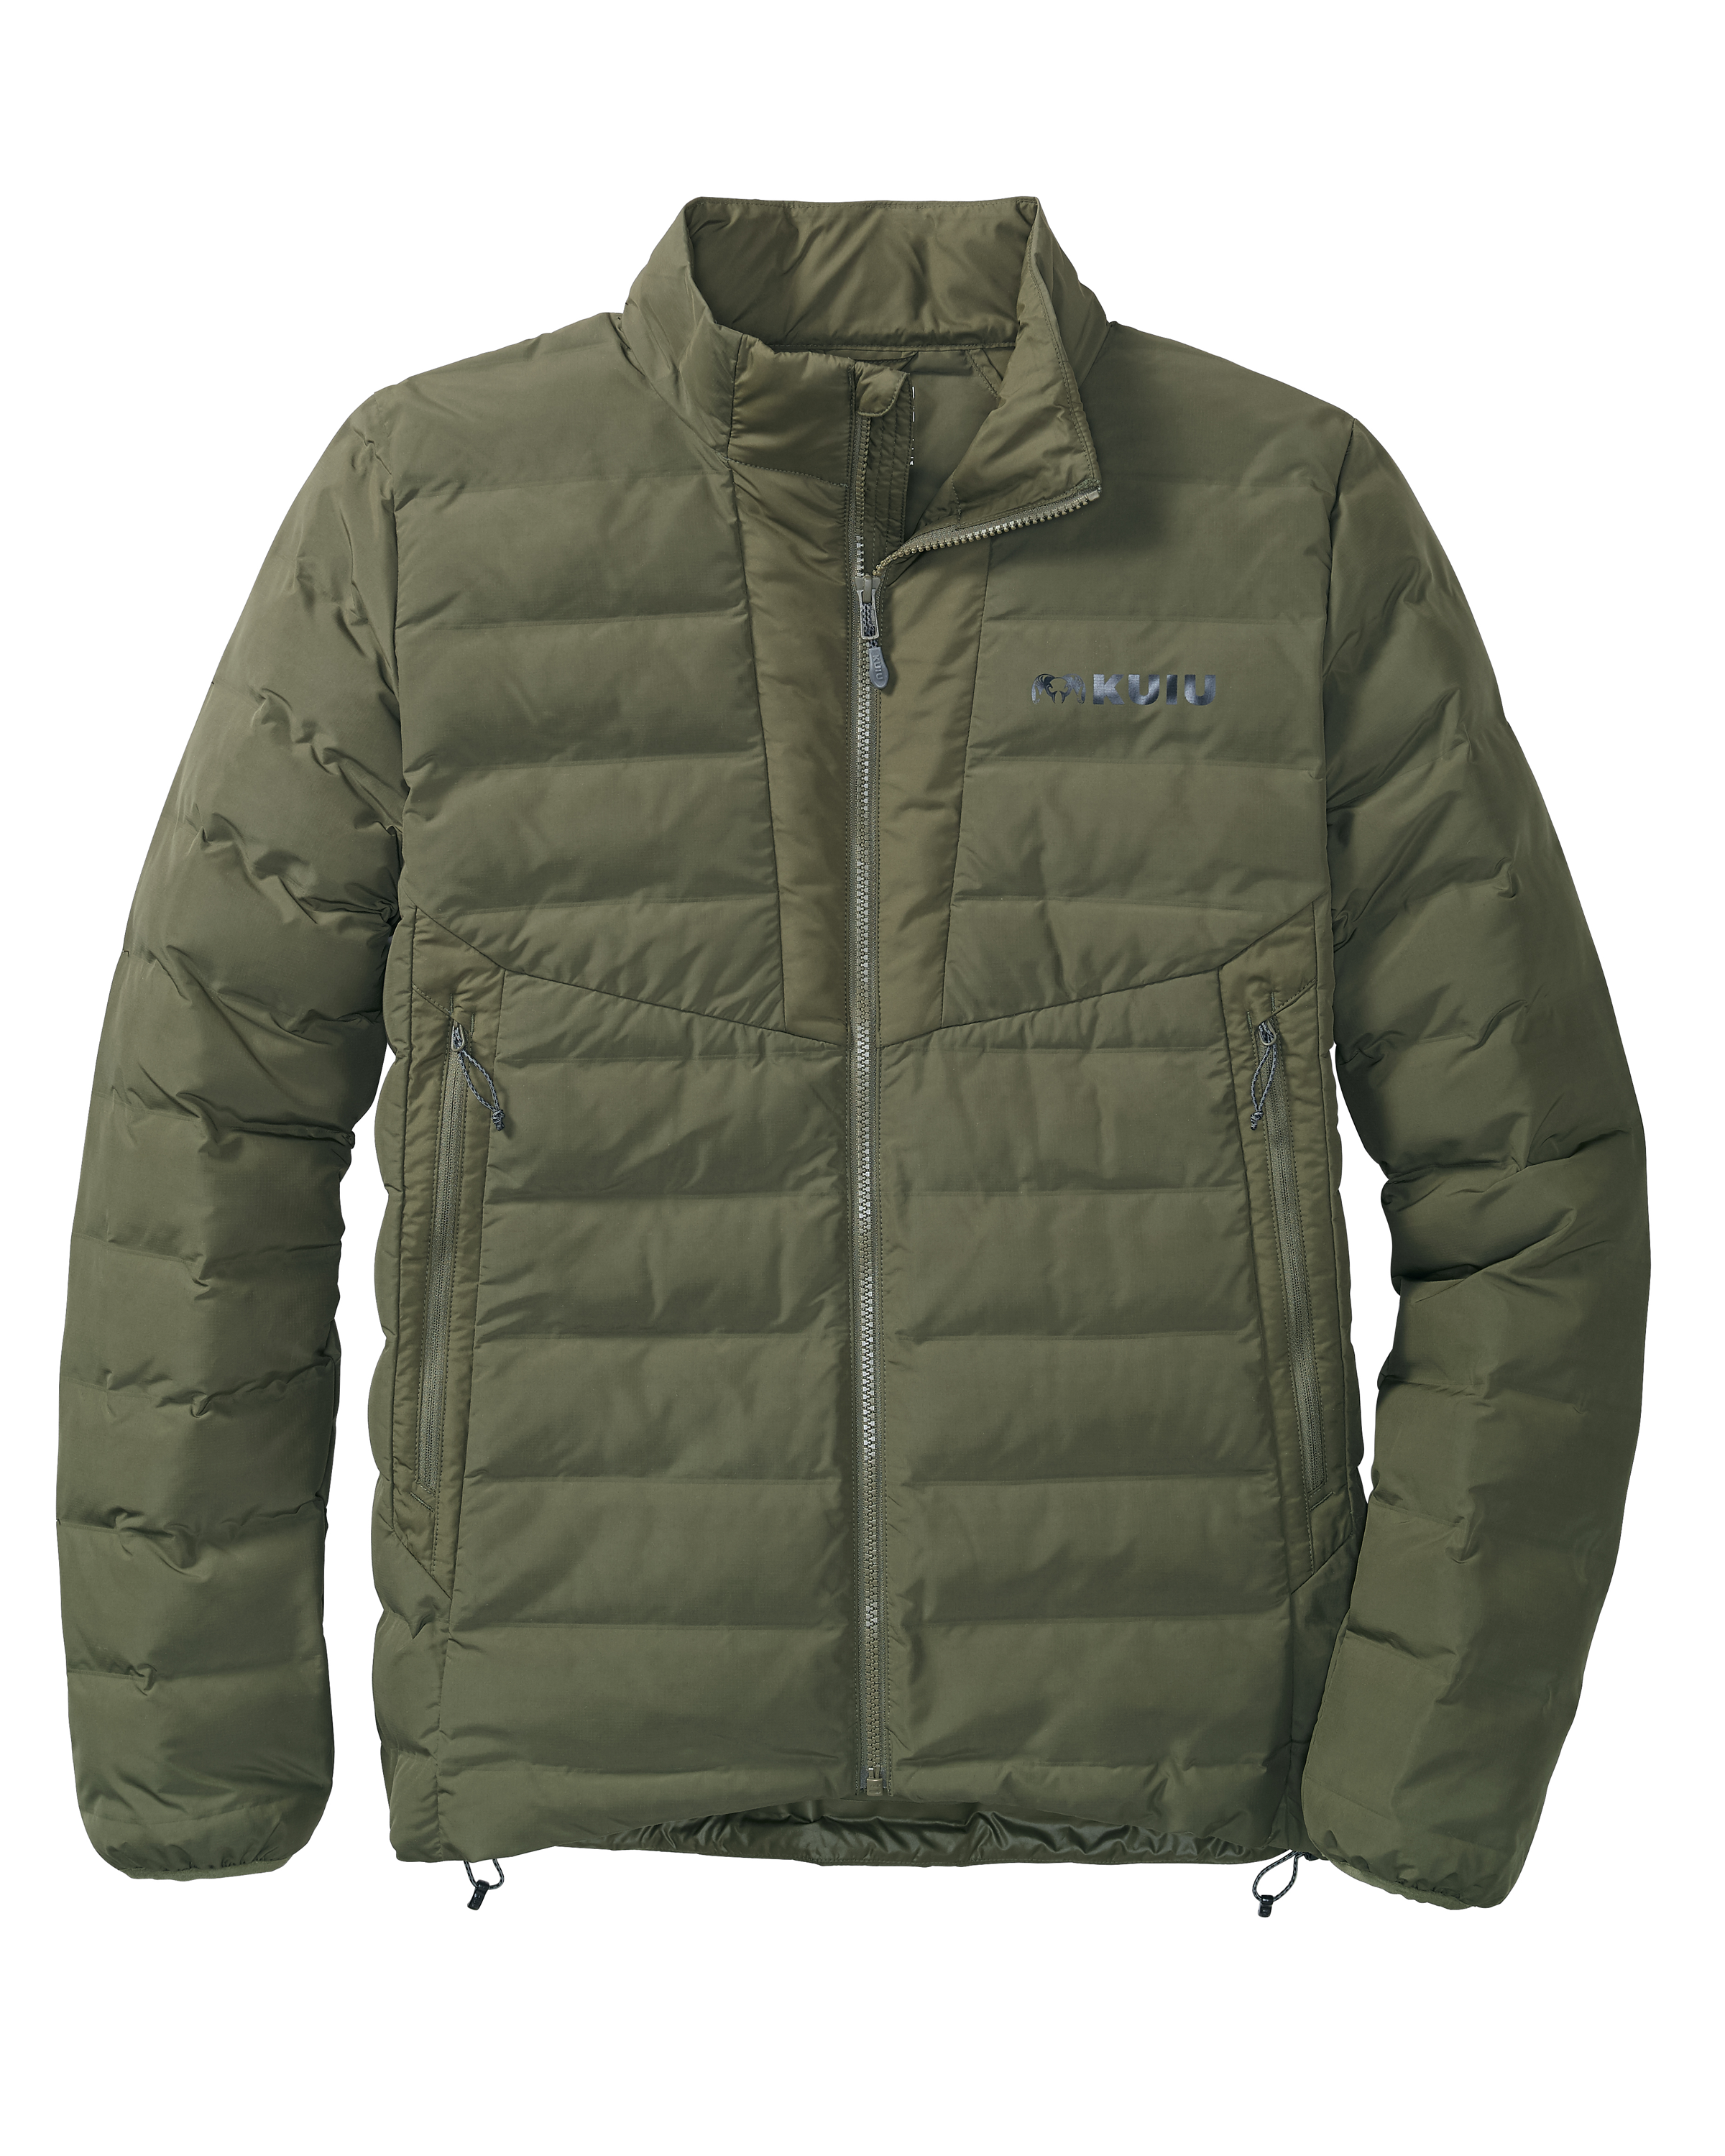 KUIU Elements Hunting Jacket in Olive | Size 3XL